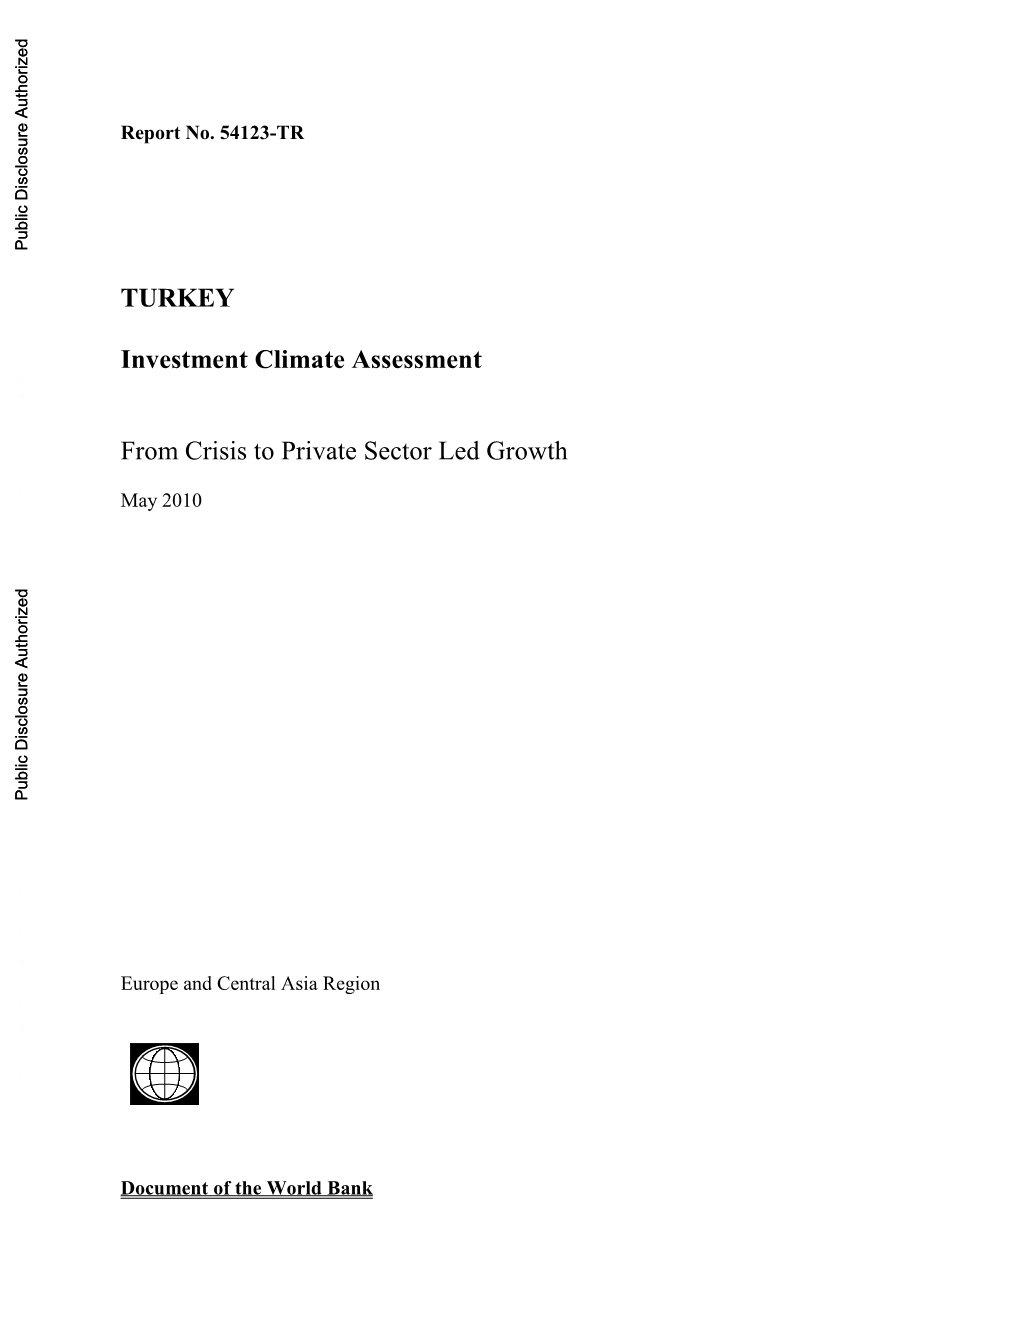 Turkey Investment Climate Assessment